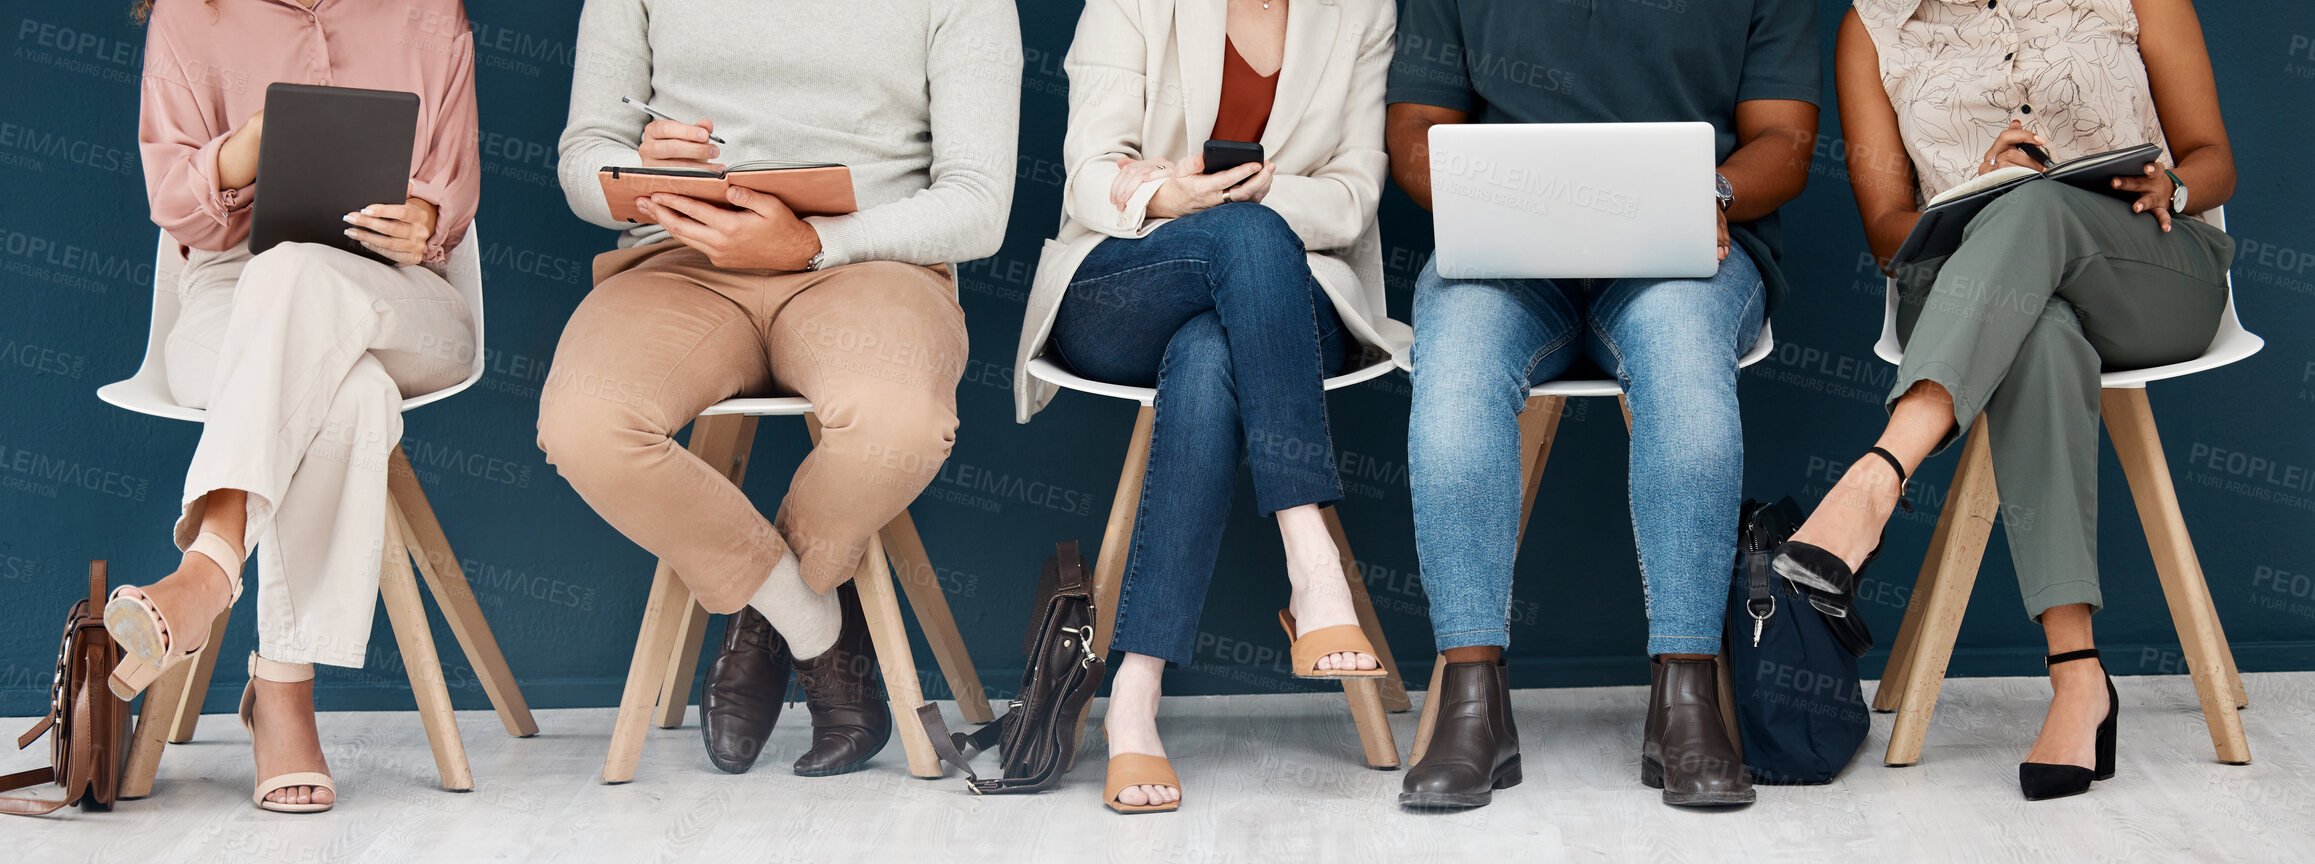 Buy stock photo Technology, diversity with group of people and sitting together. Laptop, smartphone and tablet. Social networking or media, connectivity or streaming media and colleagues with tech sit on chair